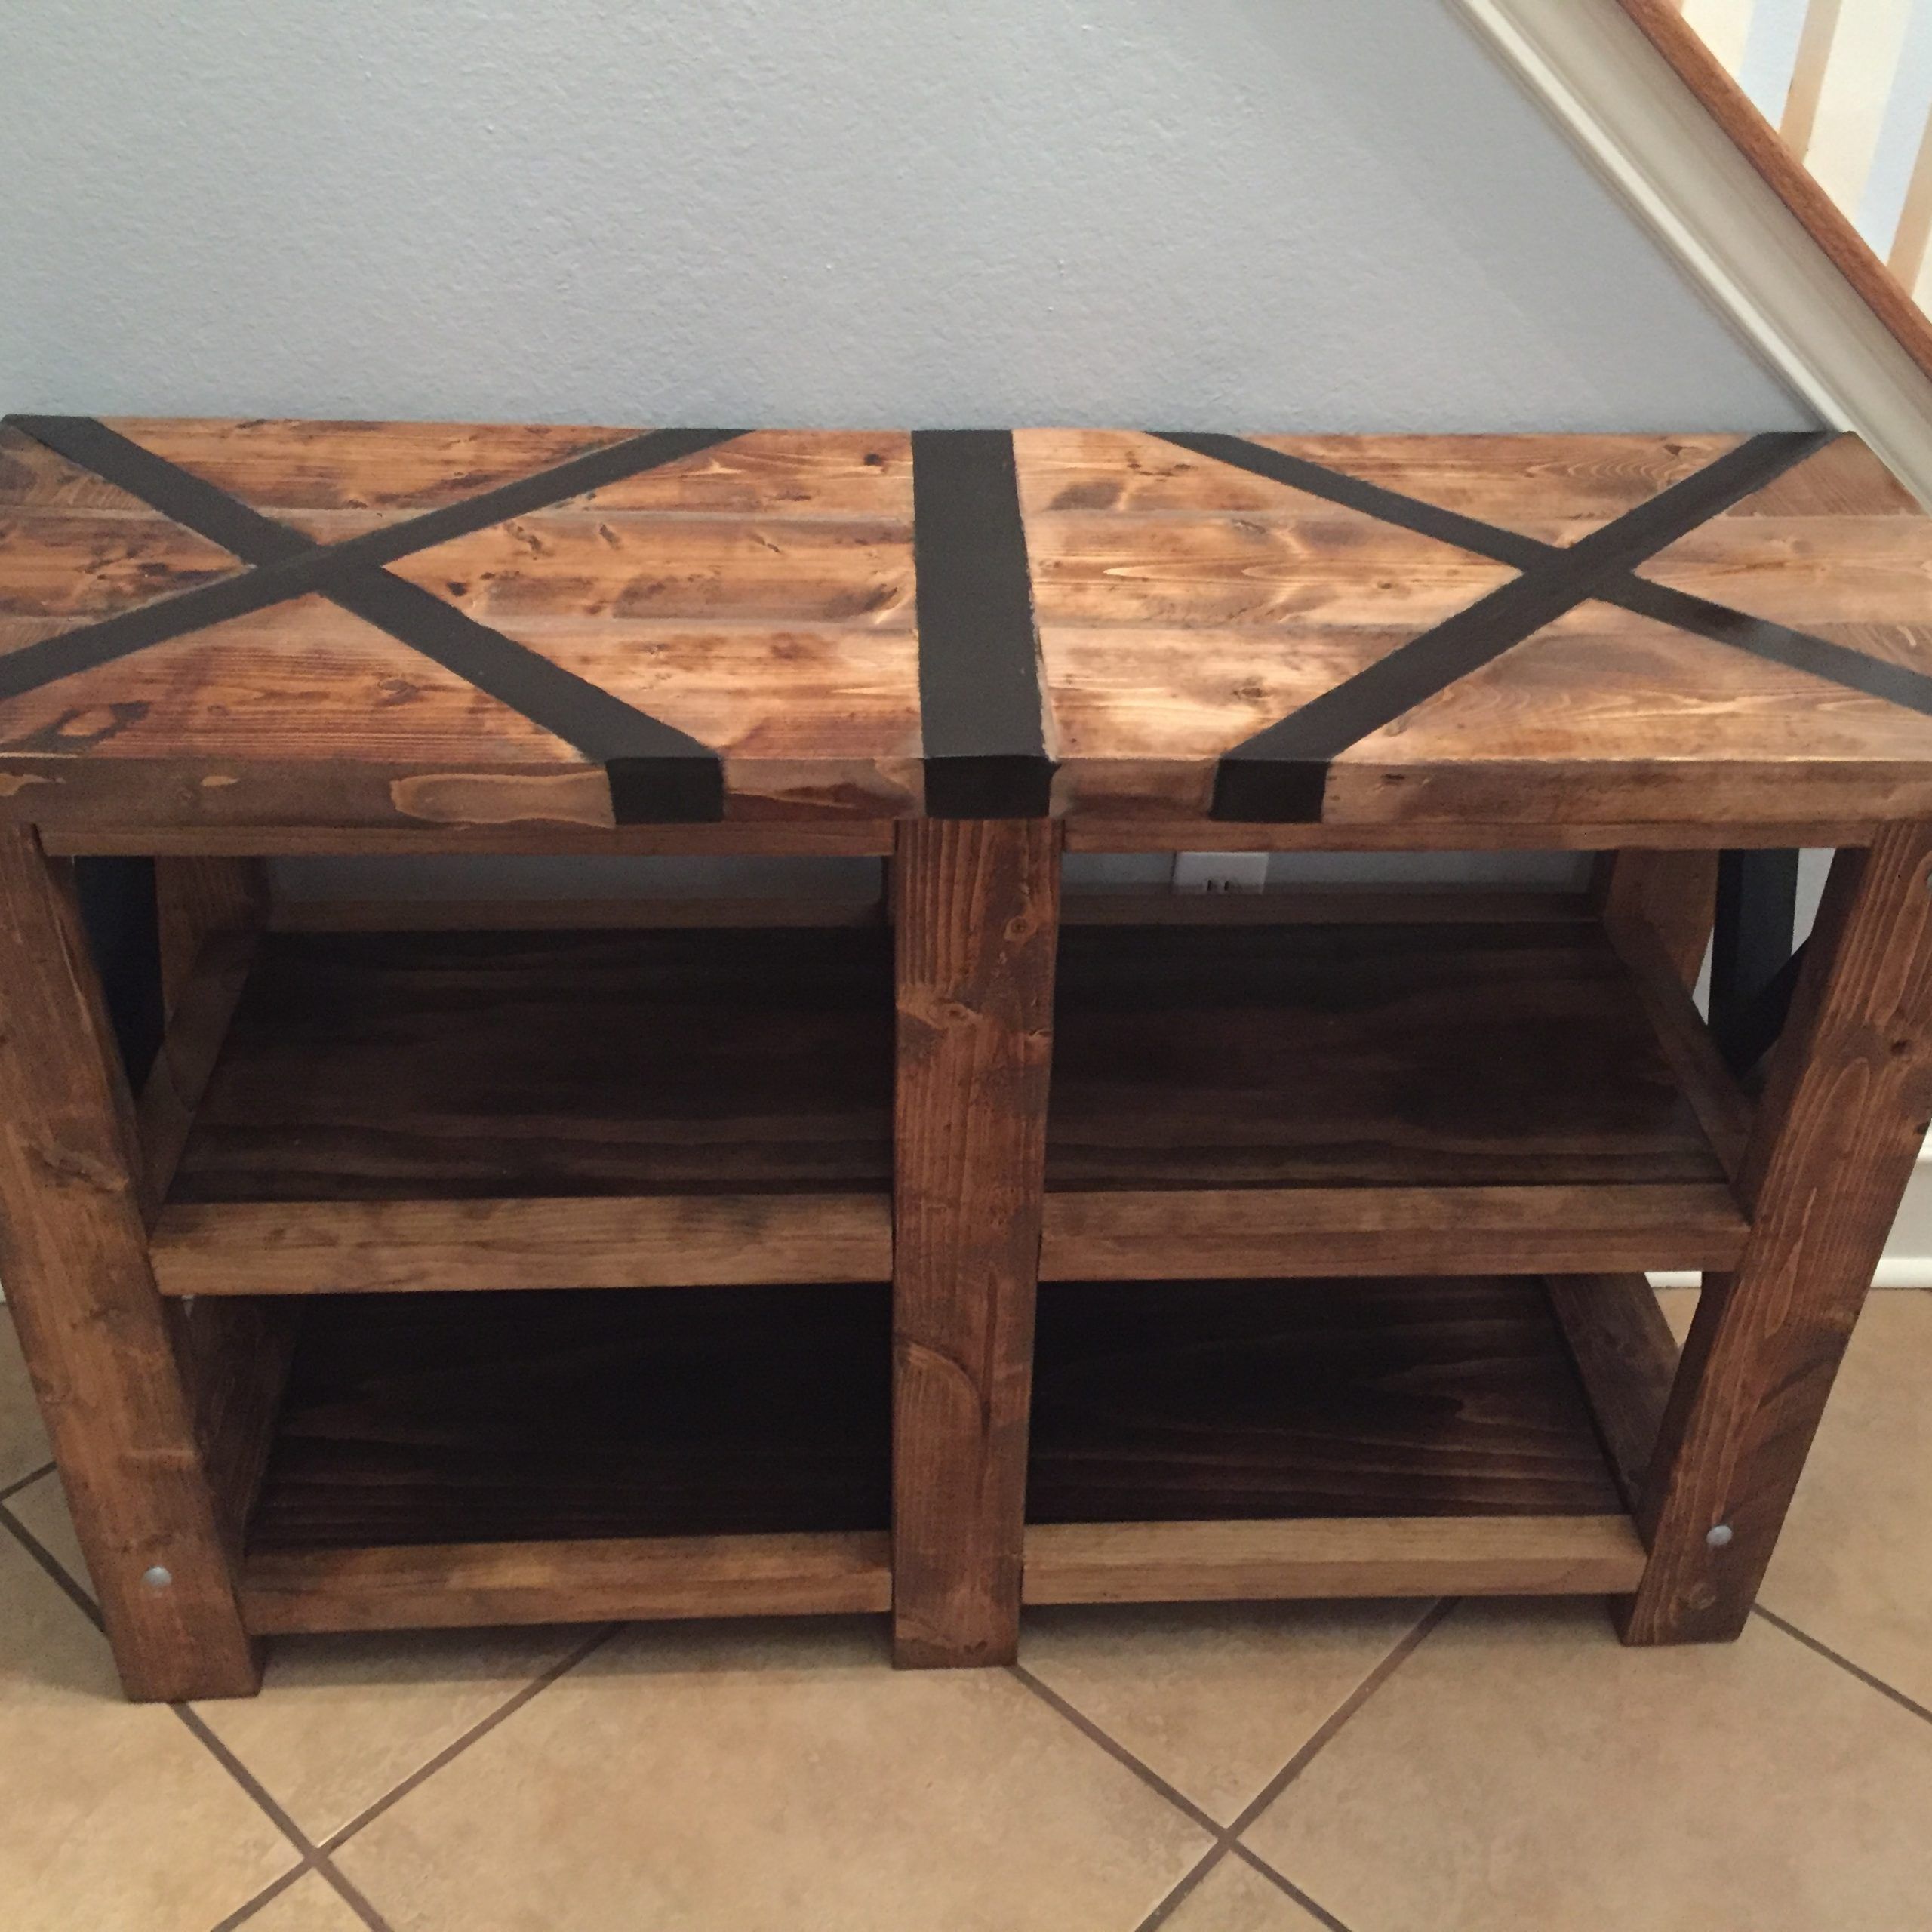 Ana White | Rustic X Console Table With X Top – Diy Projects Inside Rustic Barnside Console Tables (View 2 of 20)